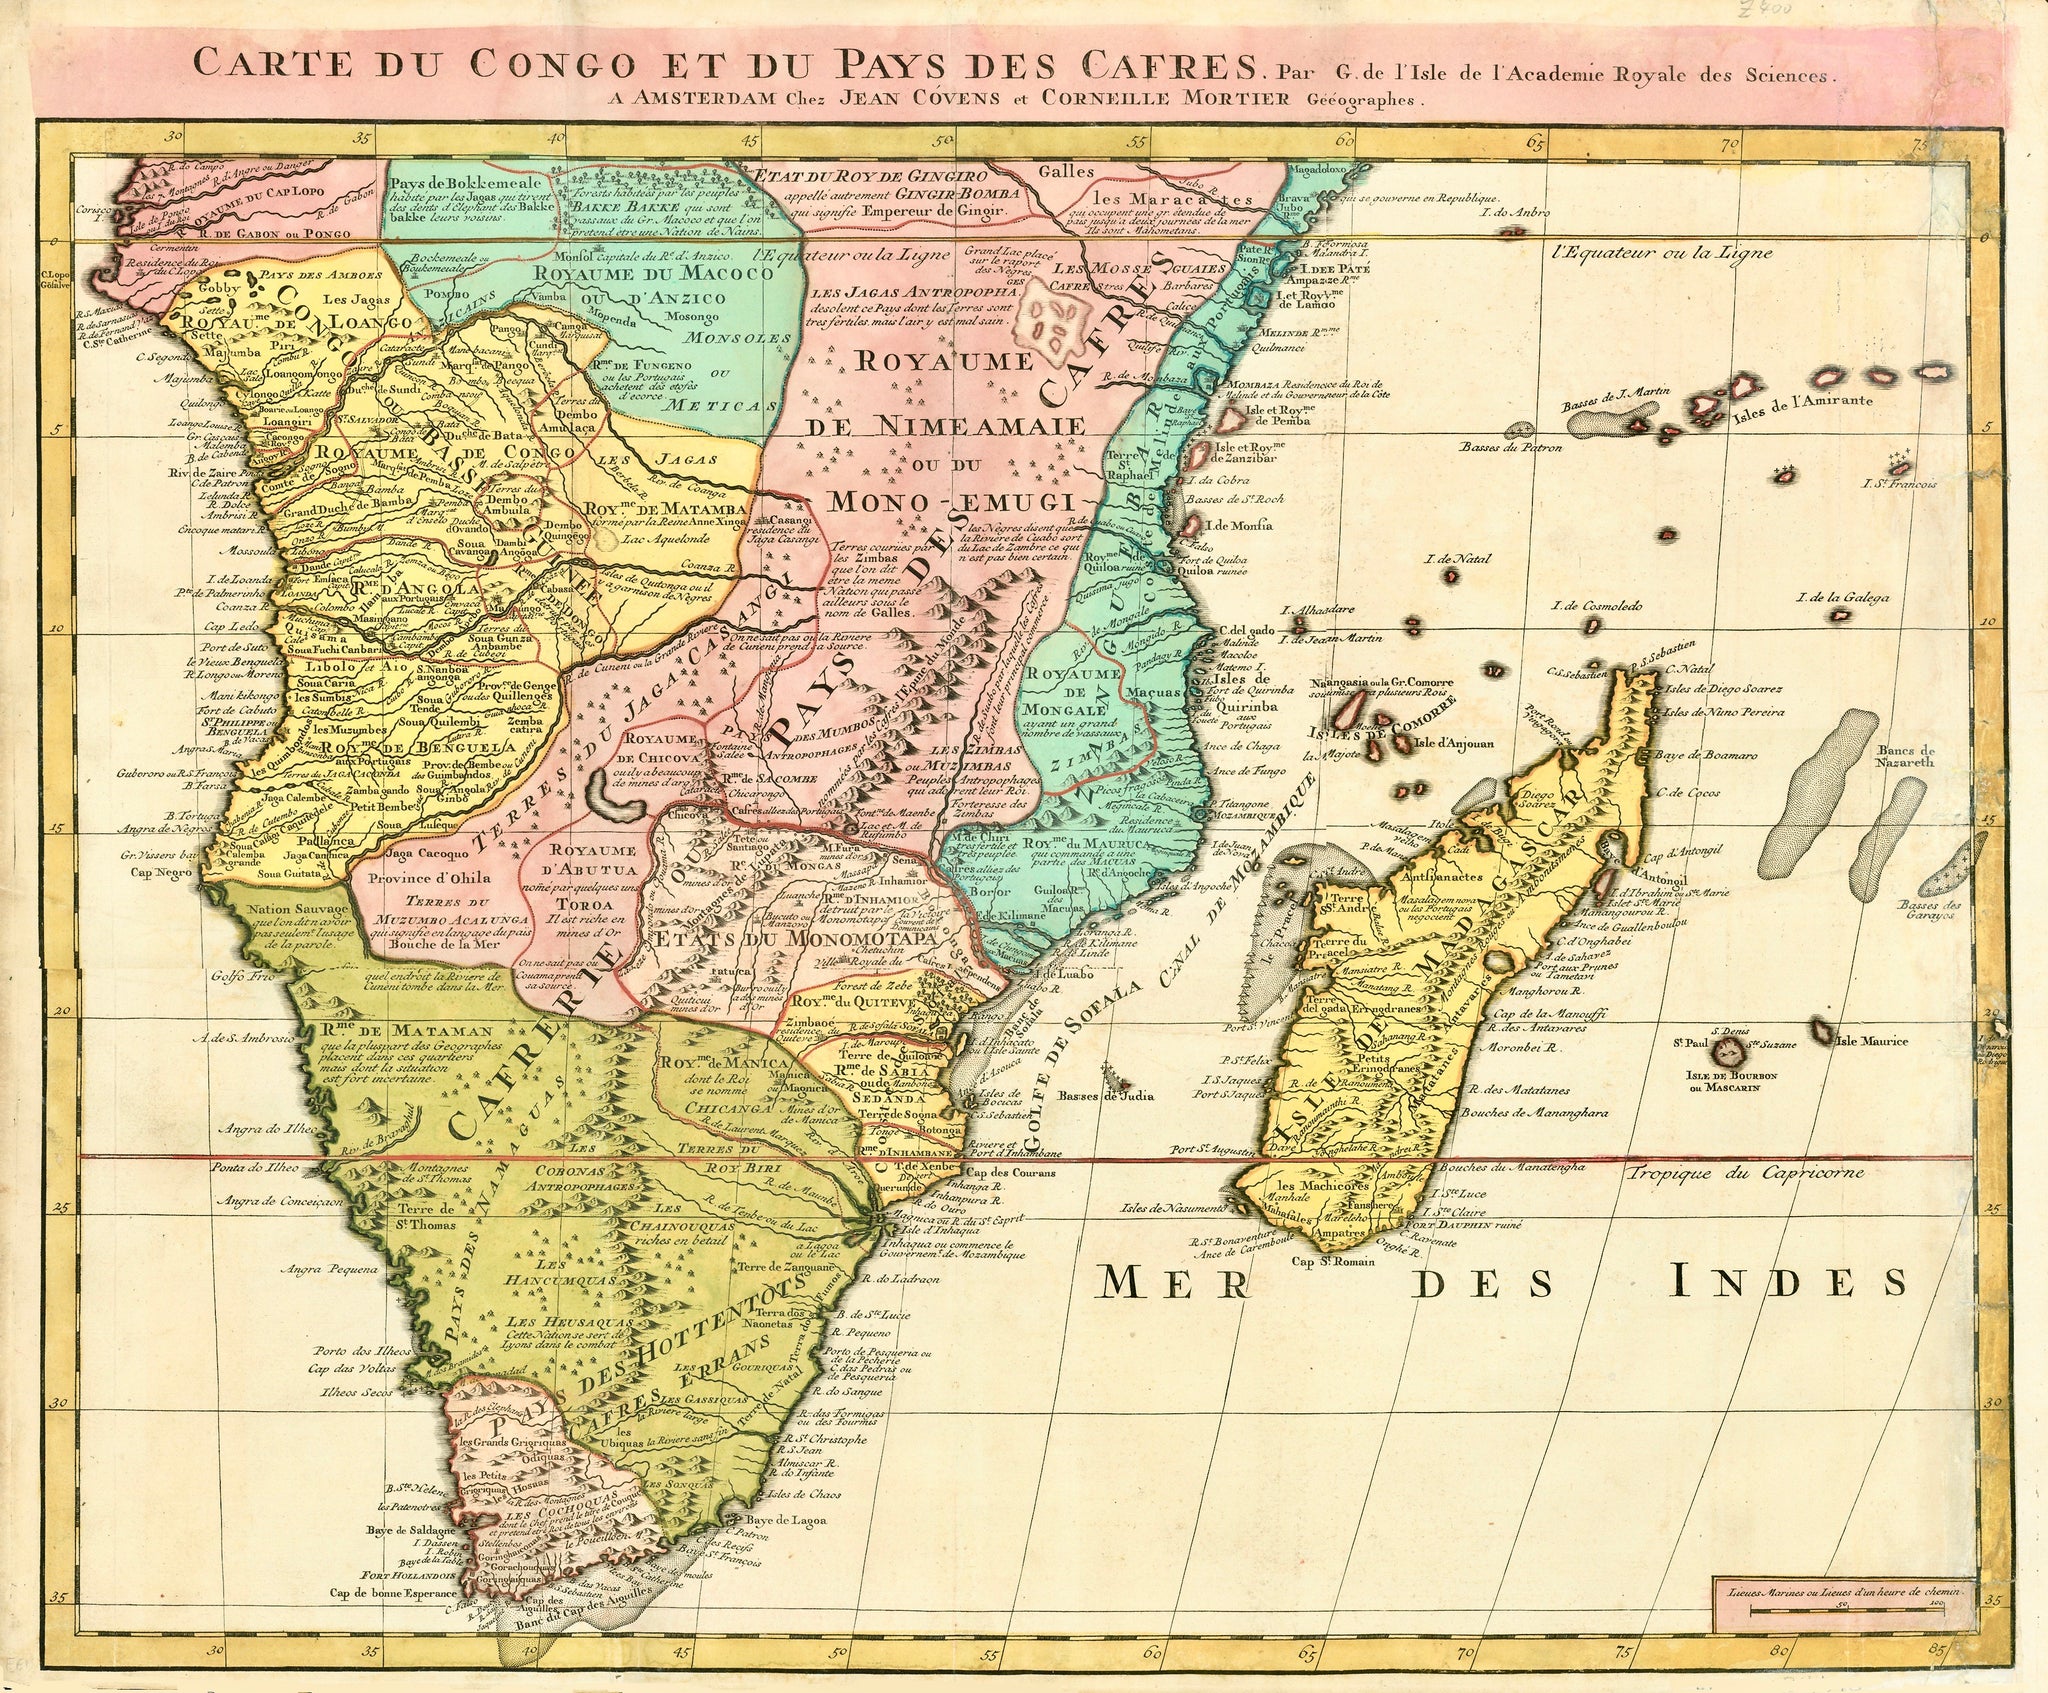 "Carte du Congo et du Pays des Cafres" Copper etching by Jean Covens and Corneille Mortier. Amsterdam, ca. 1700/10. Bright original hand coloring.  Map shows in great detail (of the time) Africa from the equator to the Cape of Good Hope. It also shows in detail the Island of Madagascar and the various island groups in the Indian Ocean, including Reunion and Maurice.